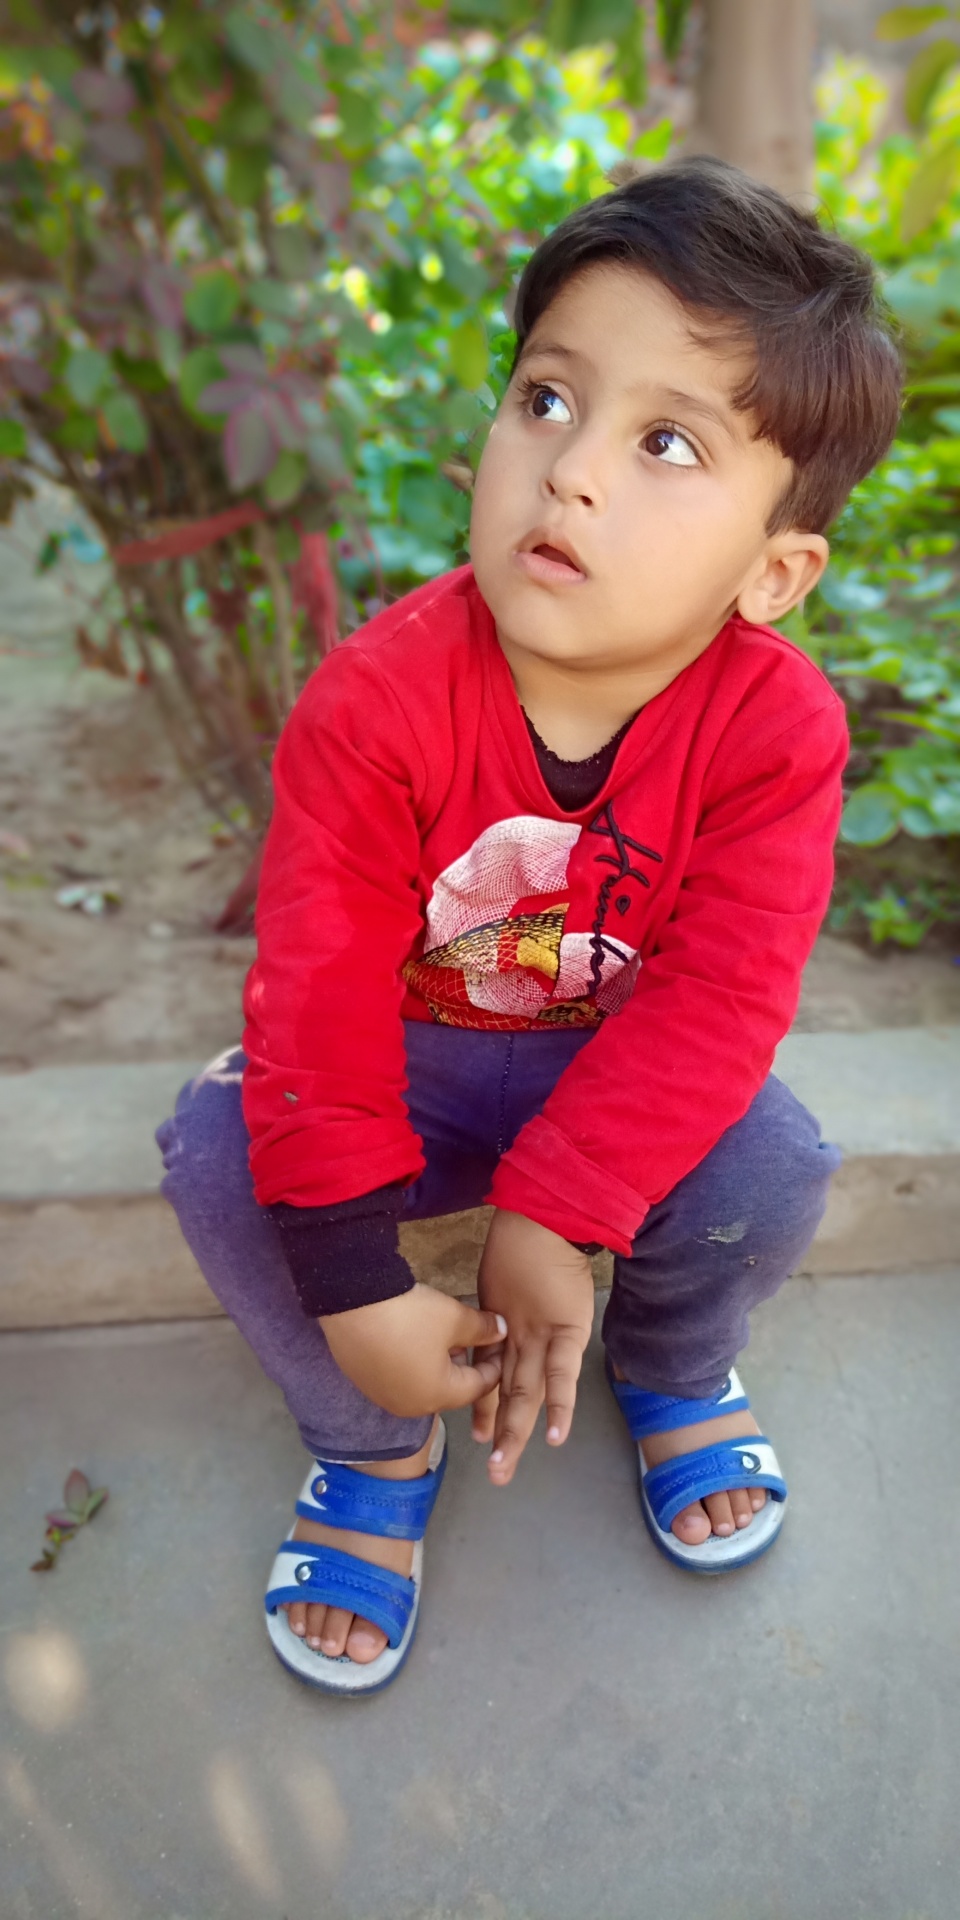 Curious Child Out In Nature